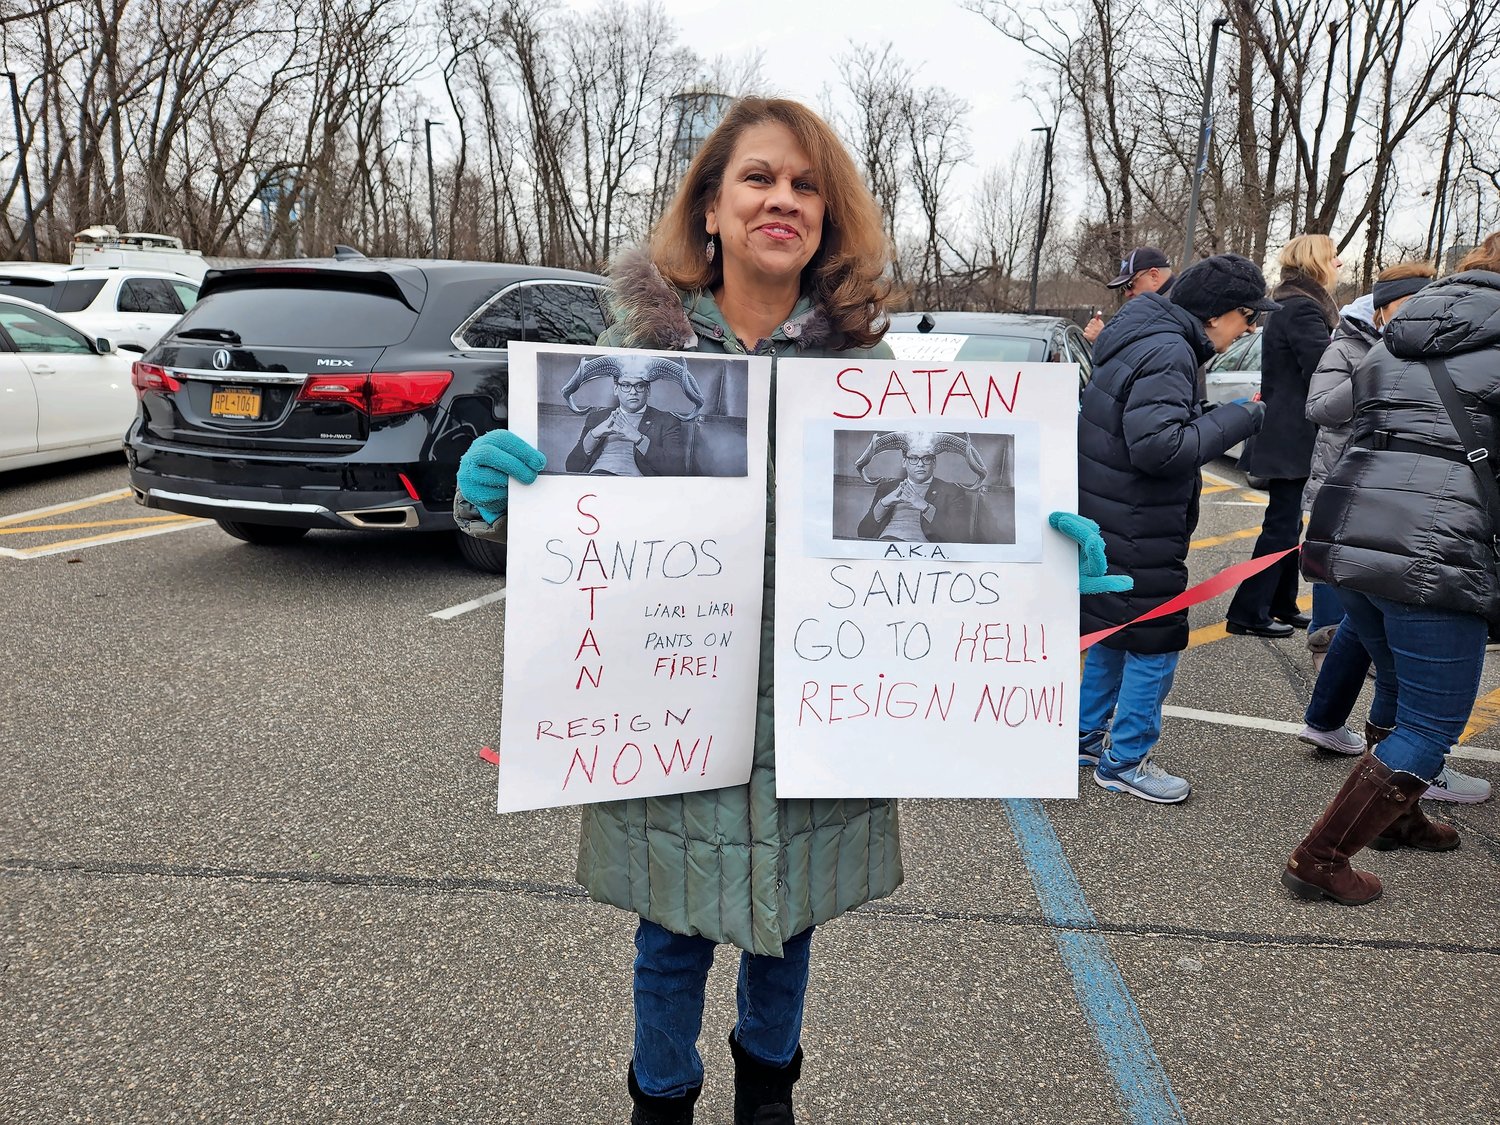 Dulce Urena, a Glen Head resident and daughter of immigrant parents, said Santos is a disgrace to American democracy.